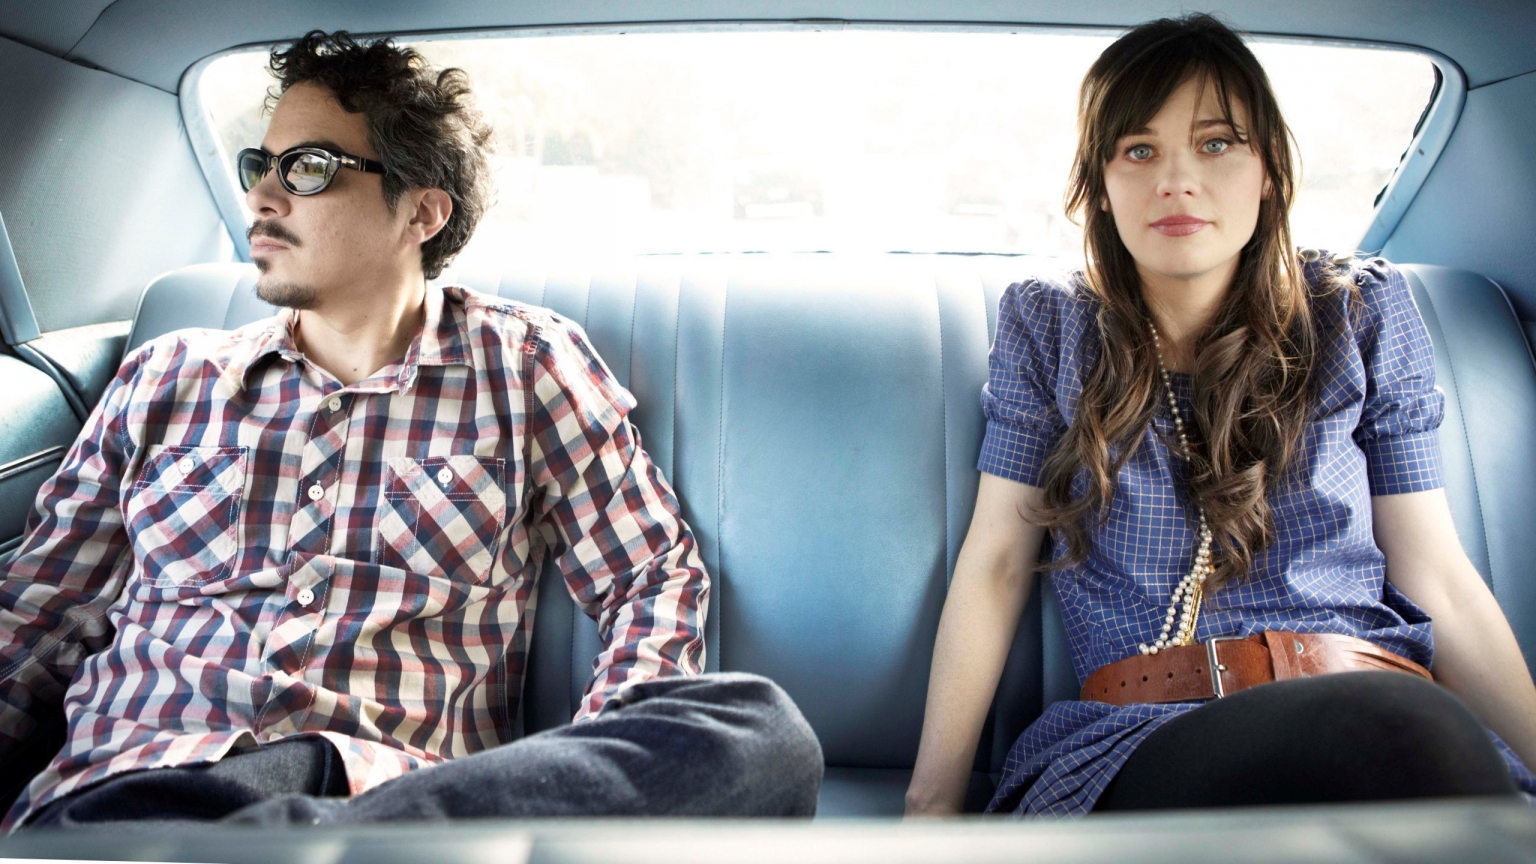 She and Him Band for 1536 x 864 HDTV resolution